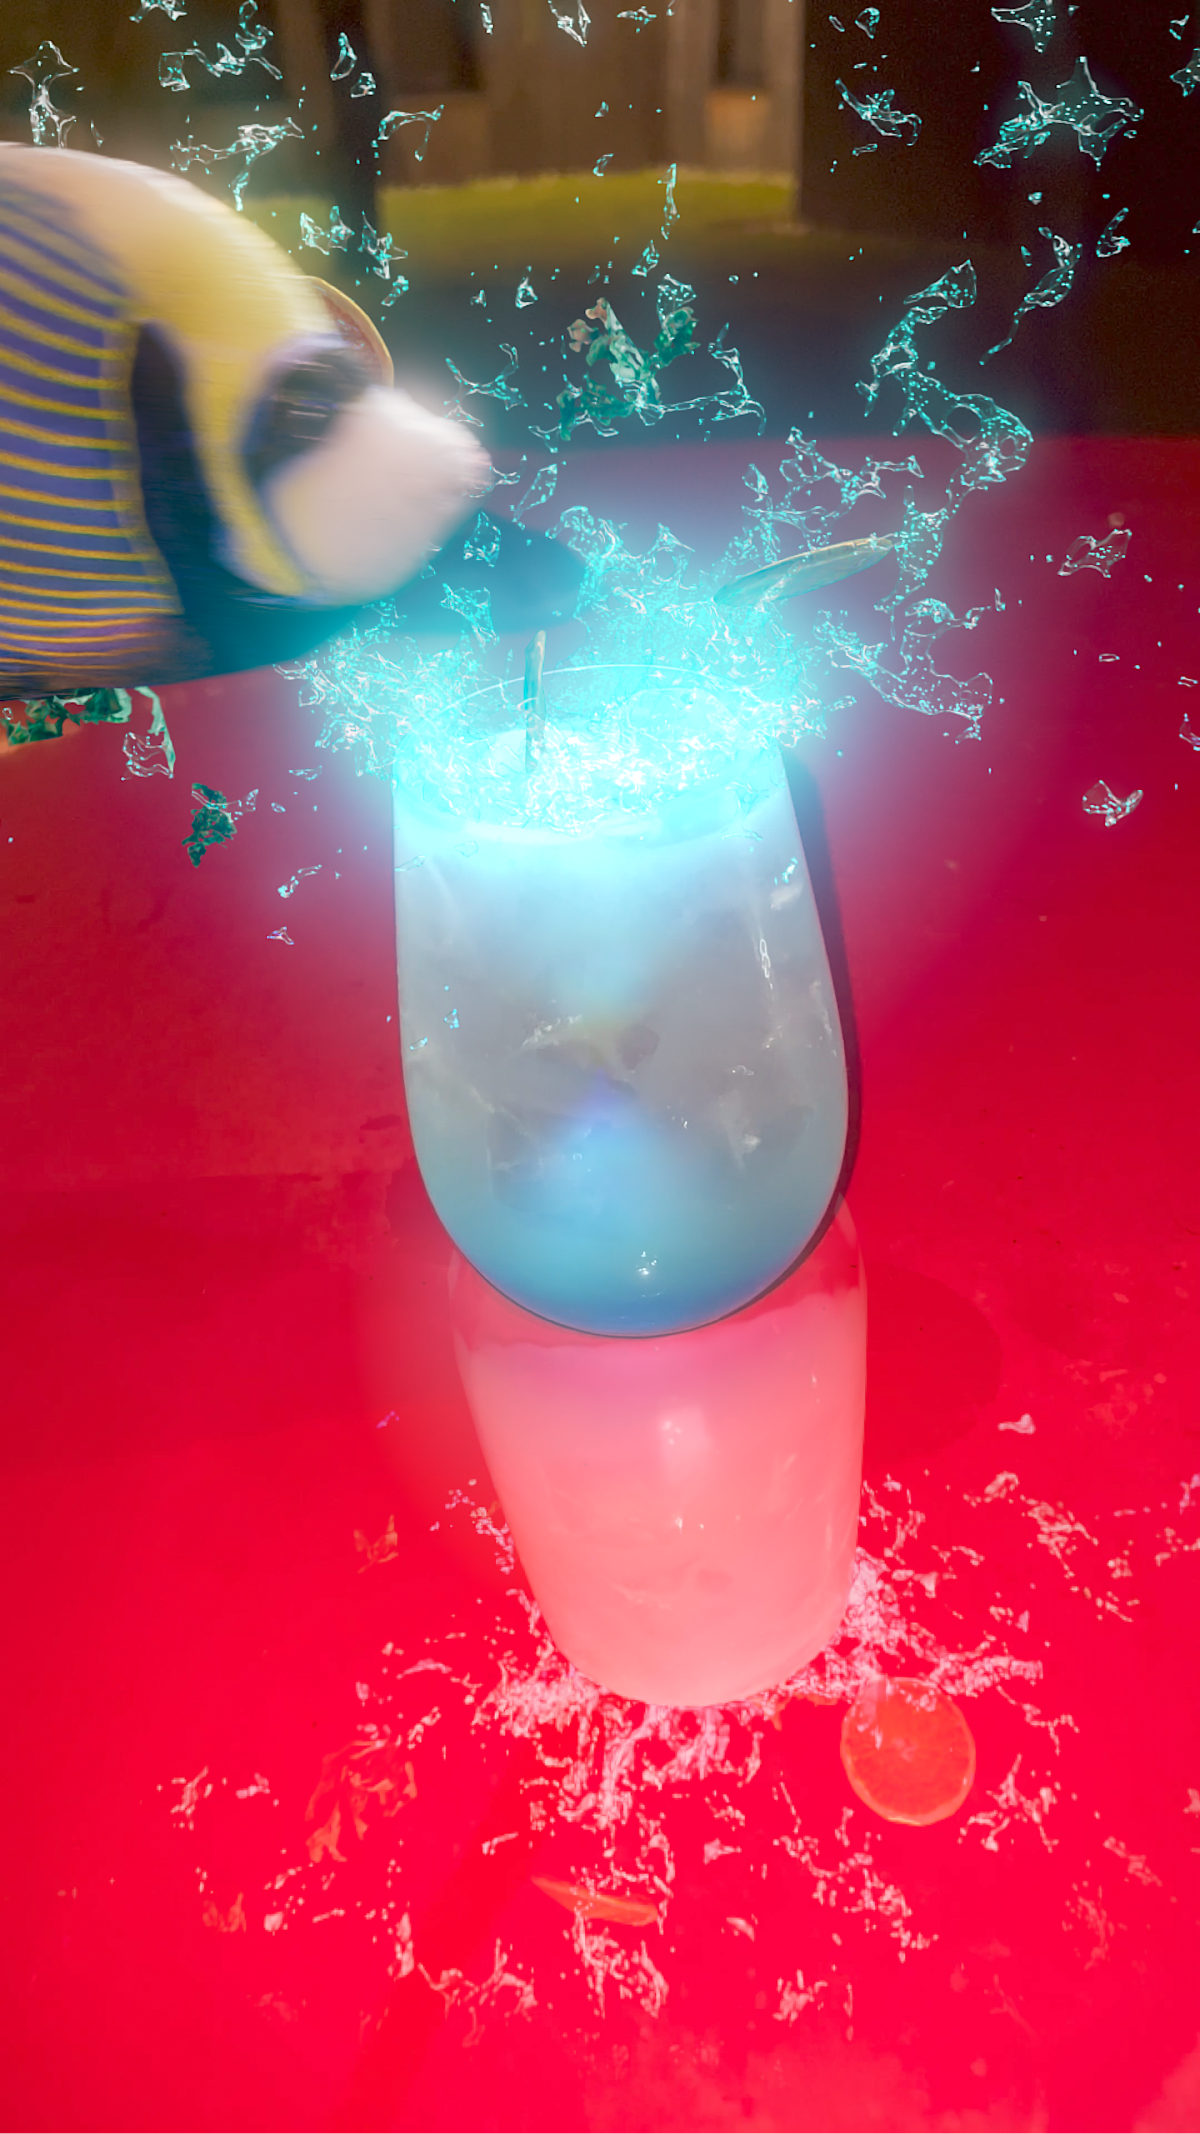 The Rib Tickler mixed reality cocktail was created for the ODDS event in Marfa. The cocktail features an AR filter inspired by different types of ODDS smart clothing sweaters.